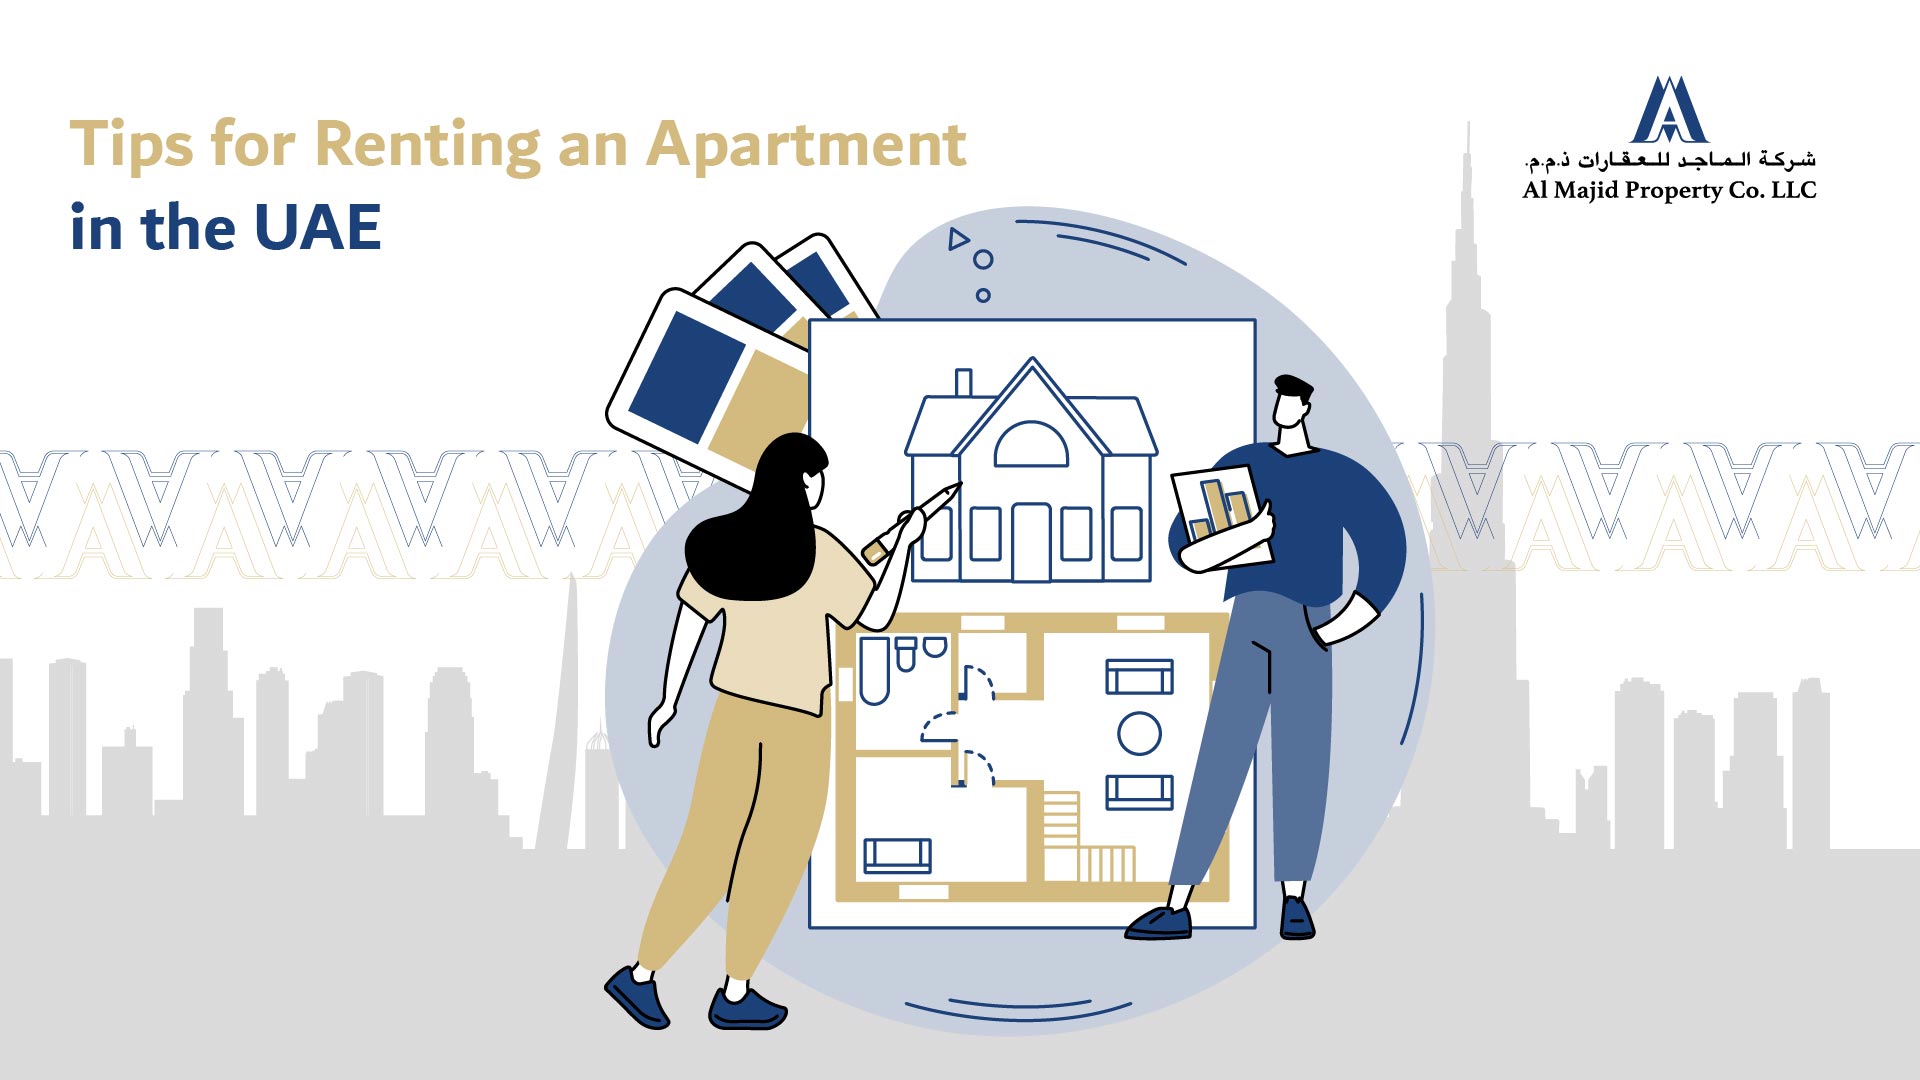 Tips for Renting an Apartment in the UAE